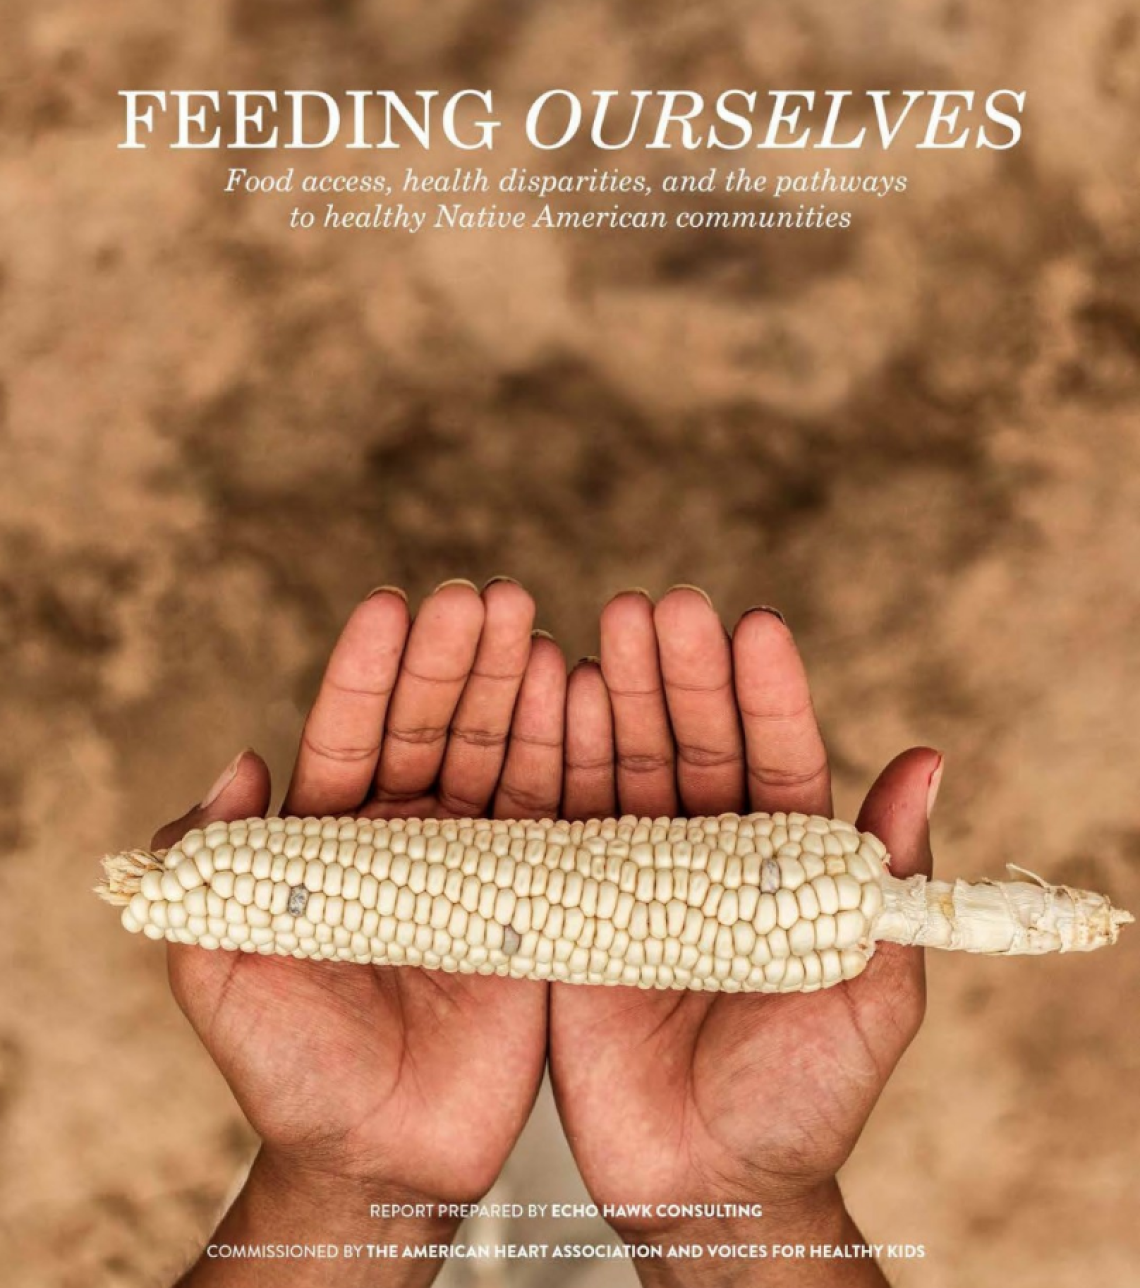 Feeding Ourselves: Food Access, Health Disparities, and the Pathways to Healthy Native American Communities